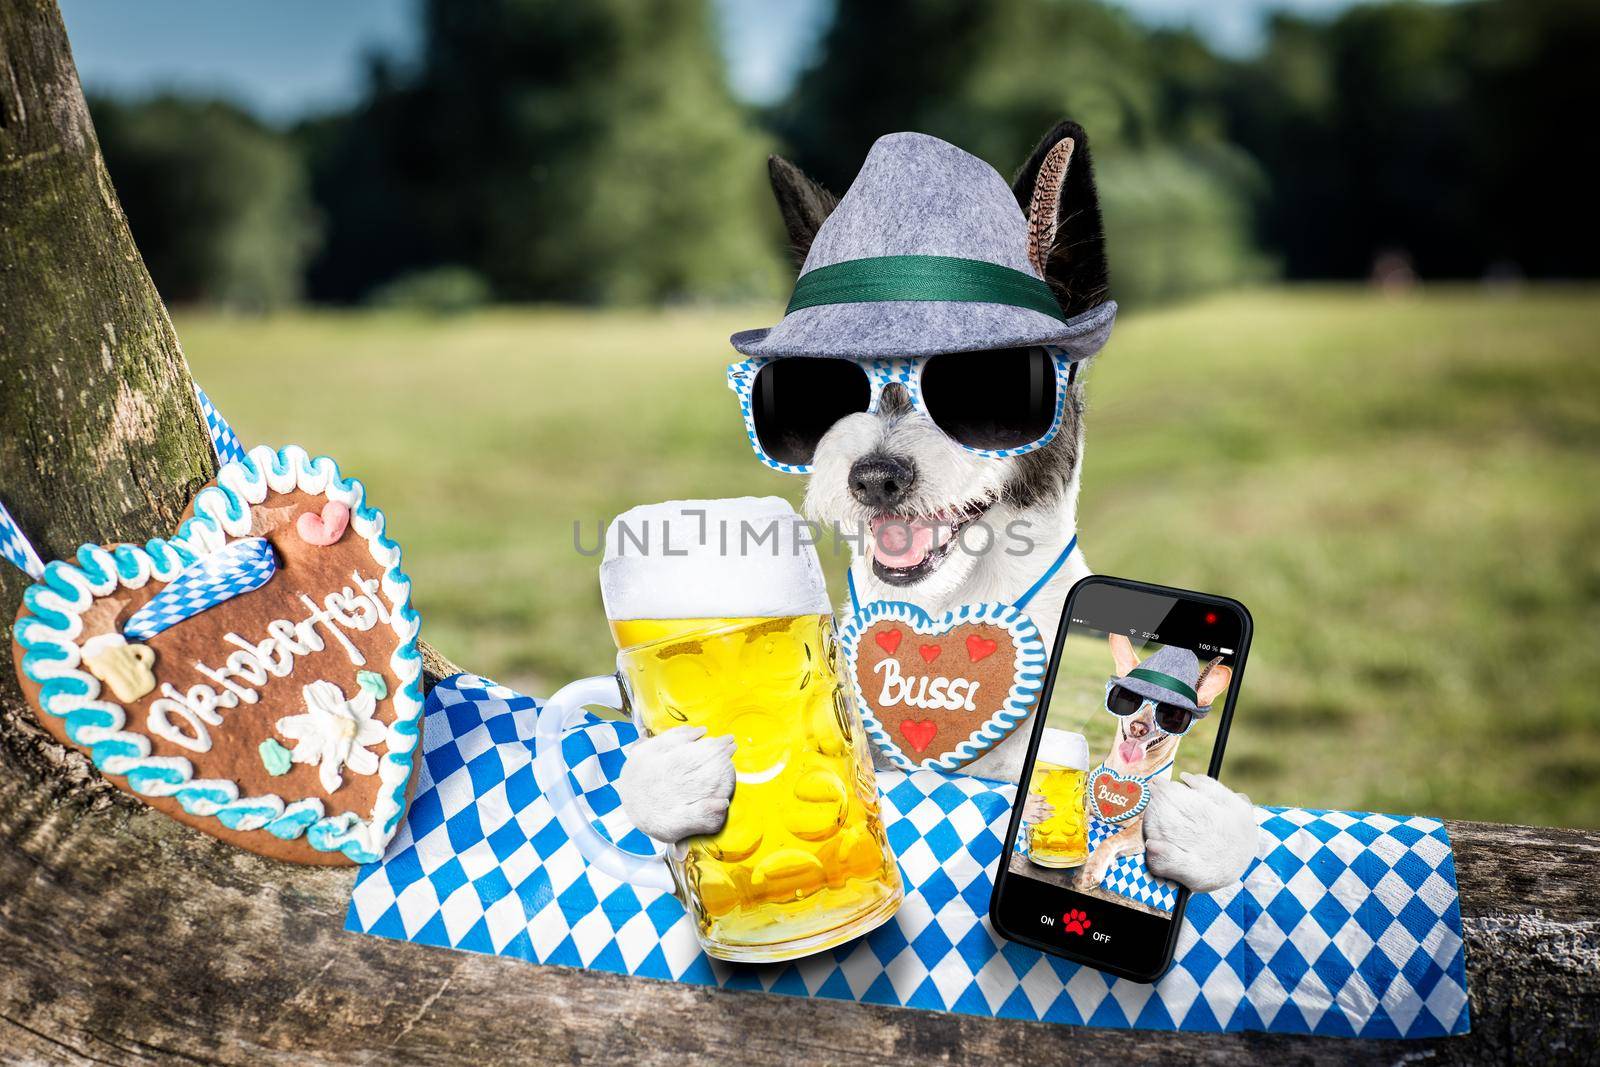 bavarian poodle  dog taking a selfie holding  a beer mug  outdoors by the river and mountains  , ready for the beer party celebration festival in munich